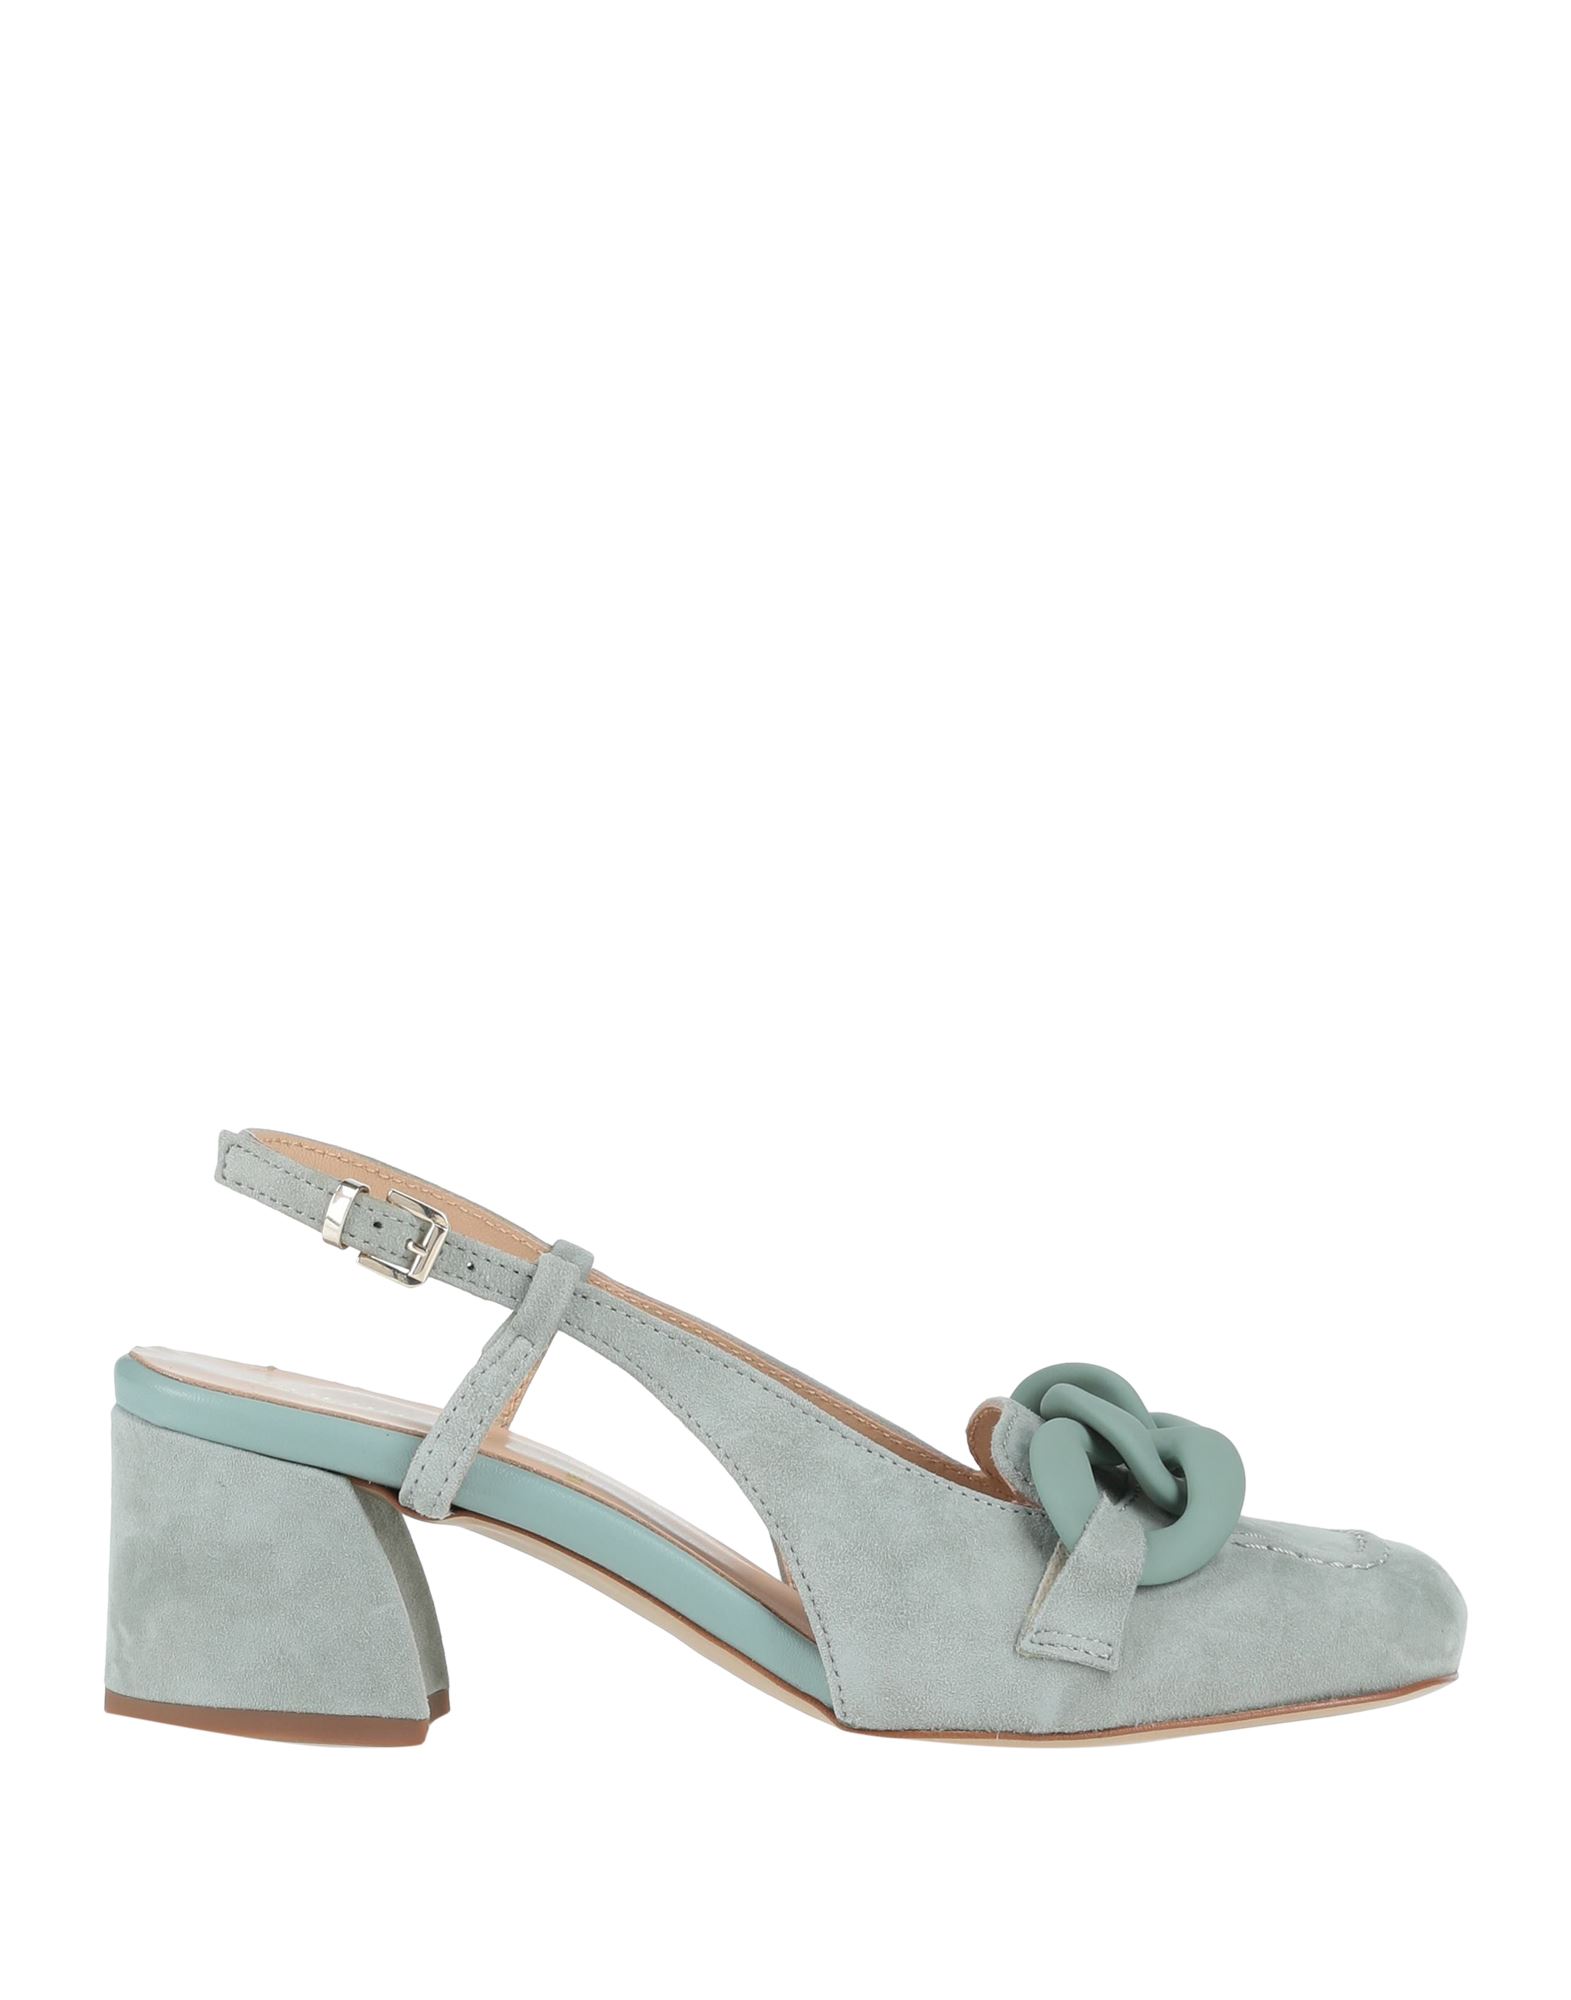 Formentini Pumps In Sage Green